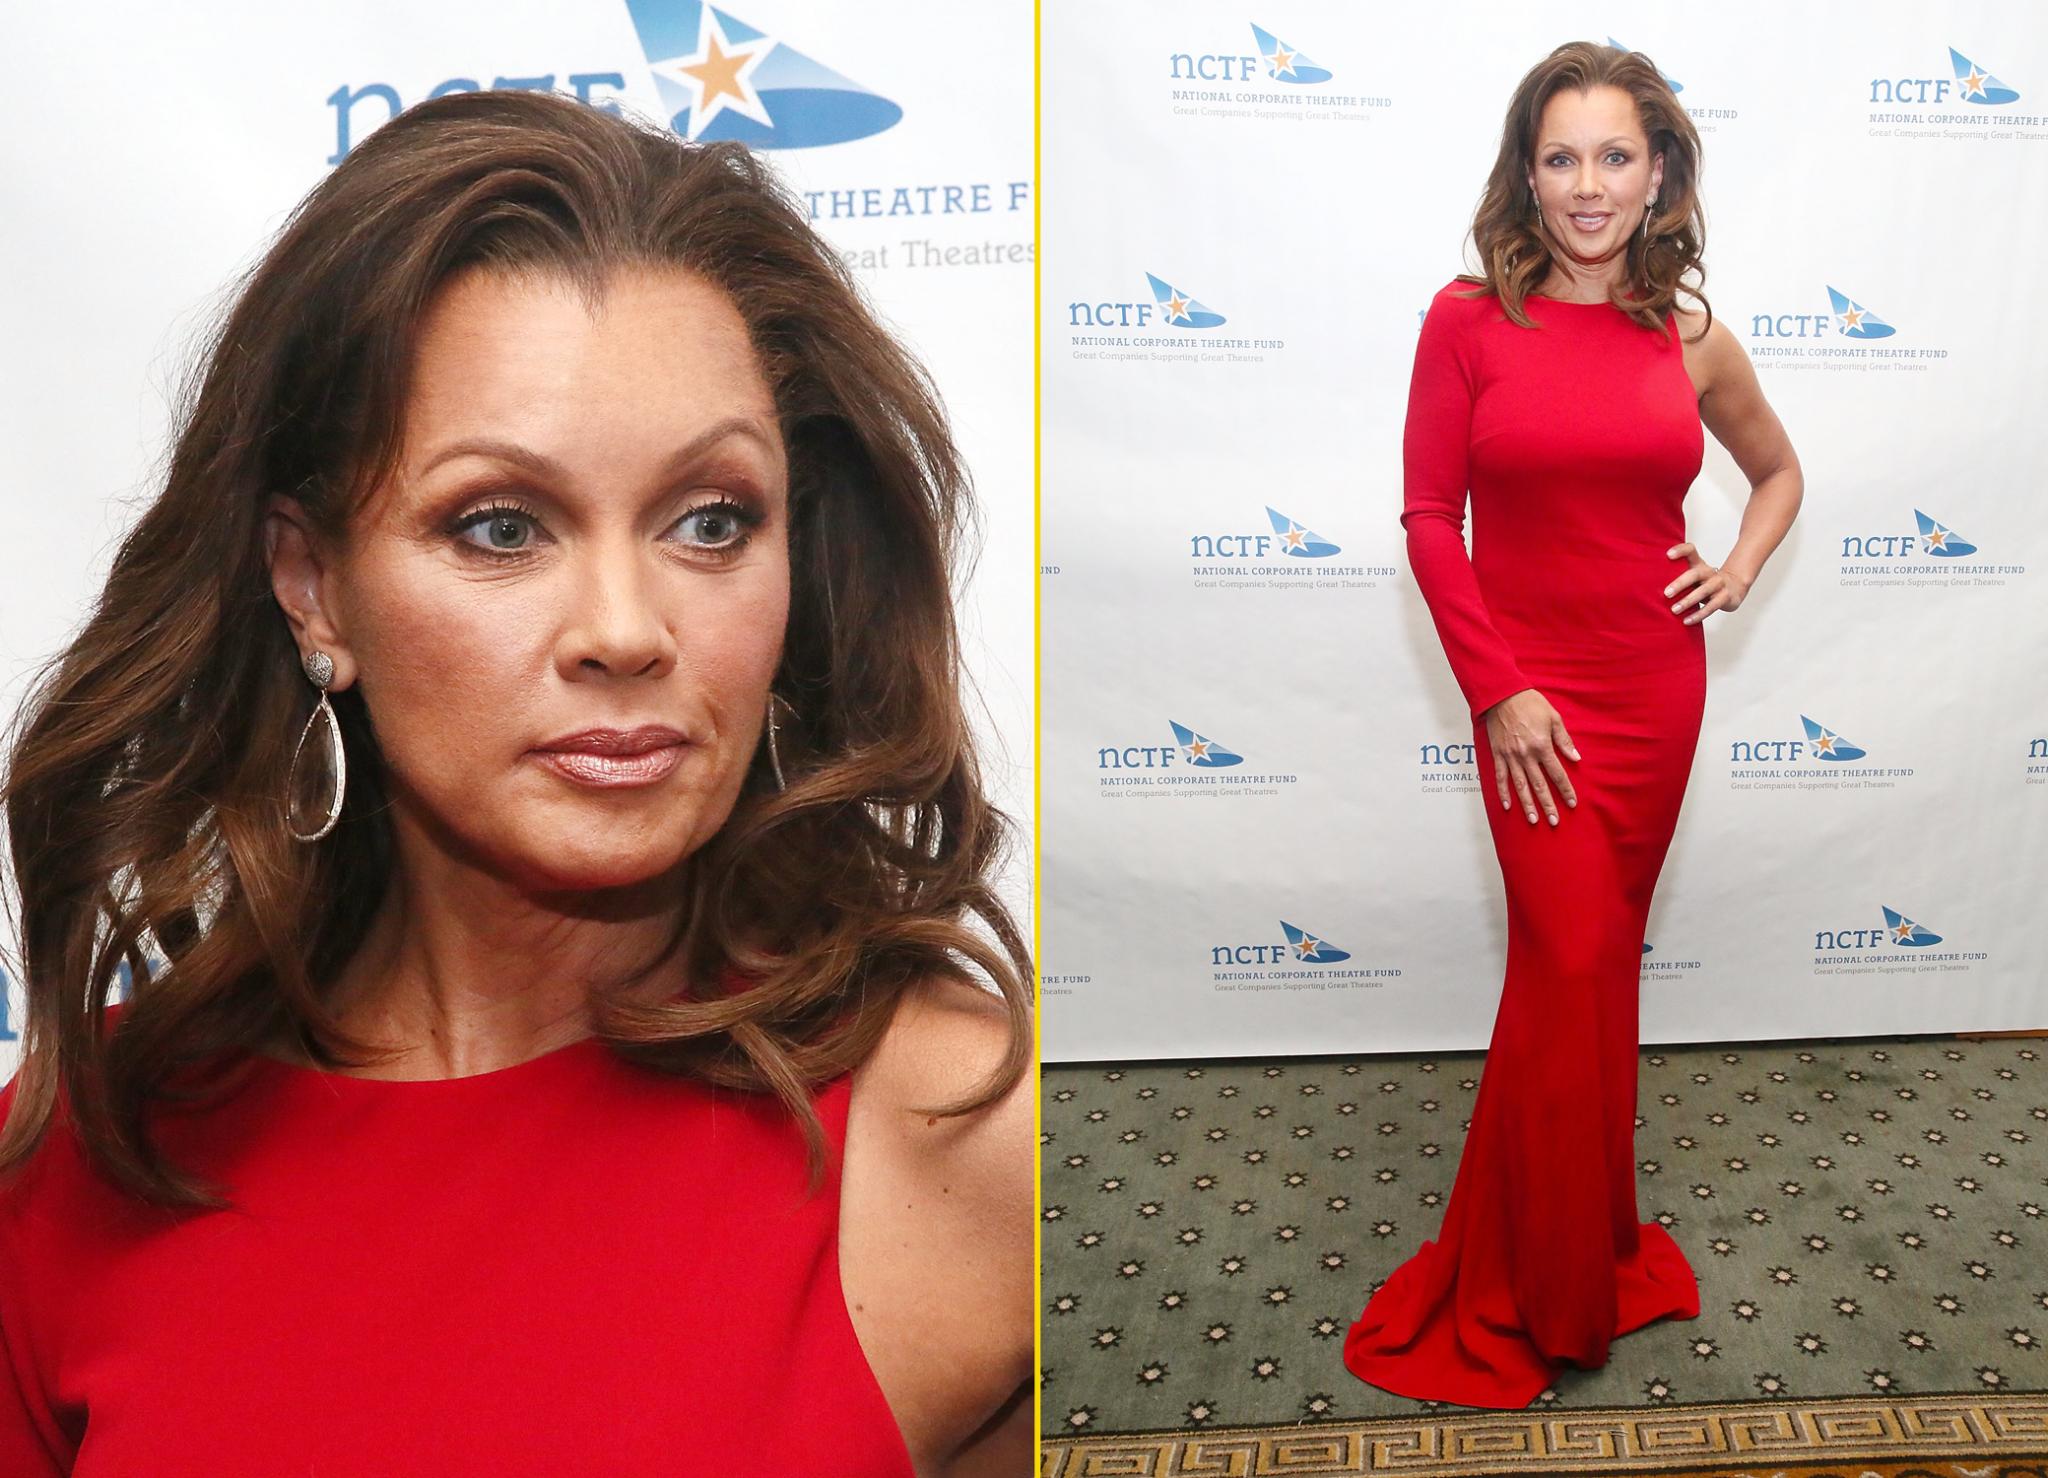 Vanessa Williams Shares Mother's Day Plans
